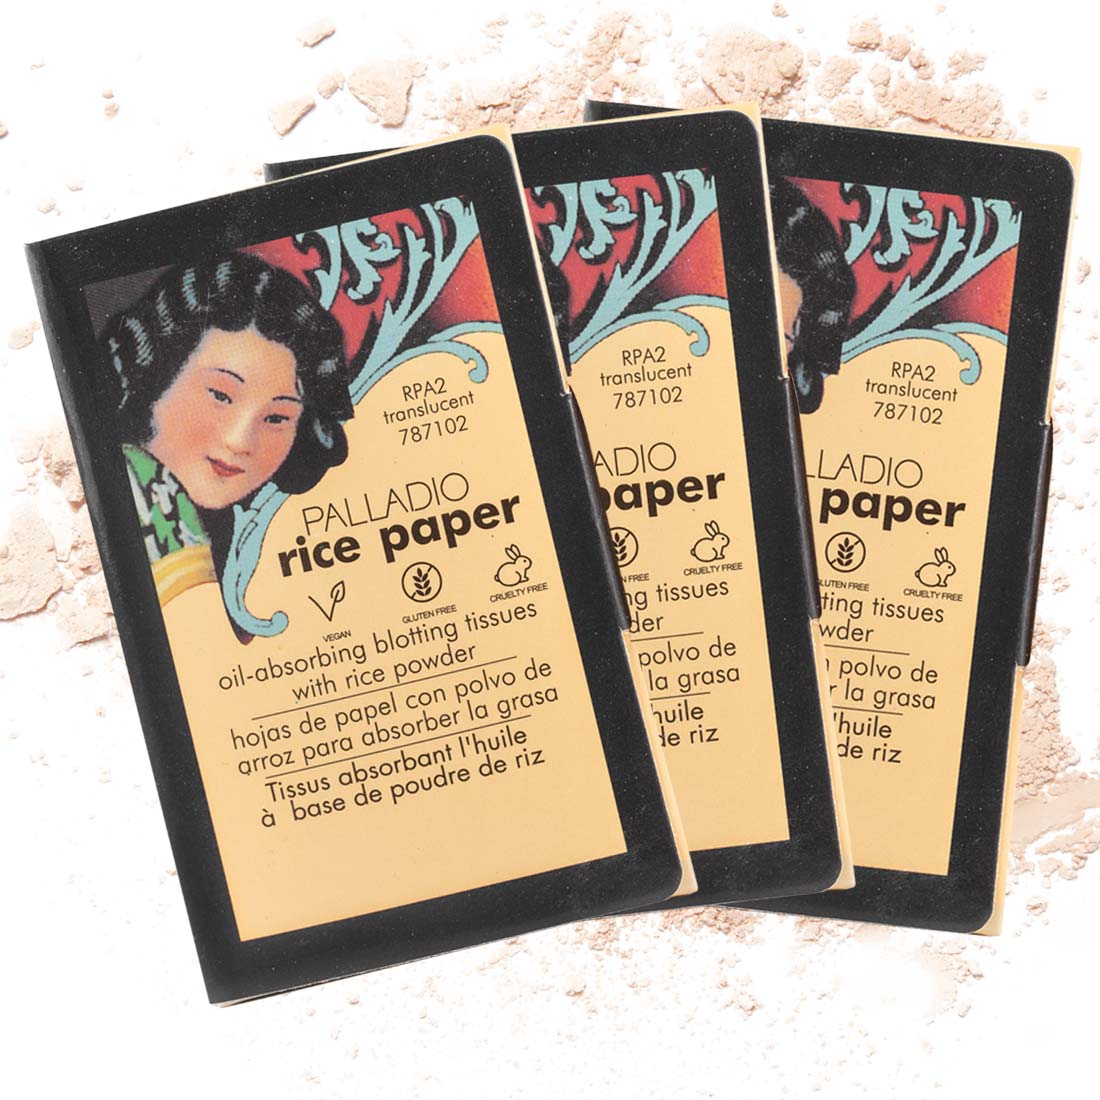 Palladio Rice Paper Facial Tissues for Oily Skin, Face Blotting Sheets Made from Natural Rice, Oil Absorbing Paper with Rice Powder, 2 Sided, Instant